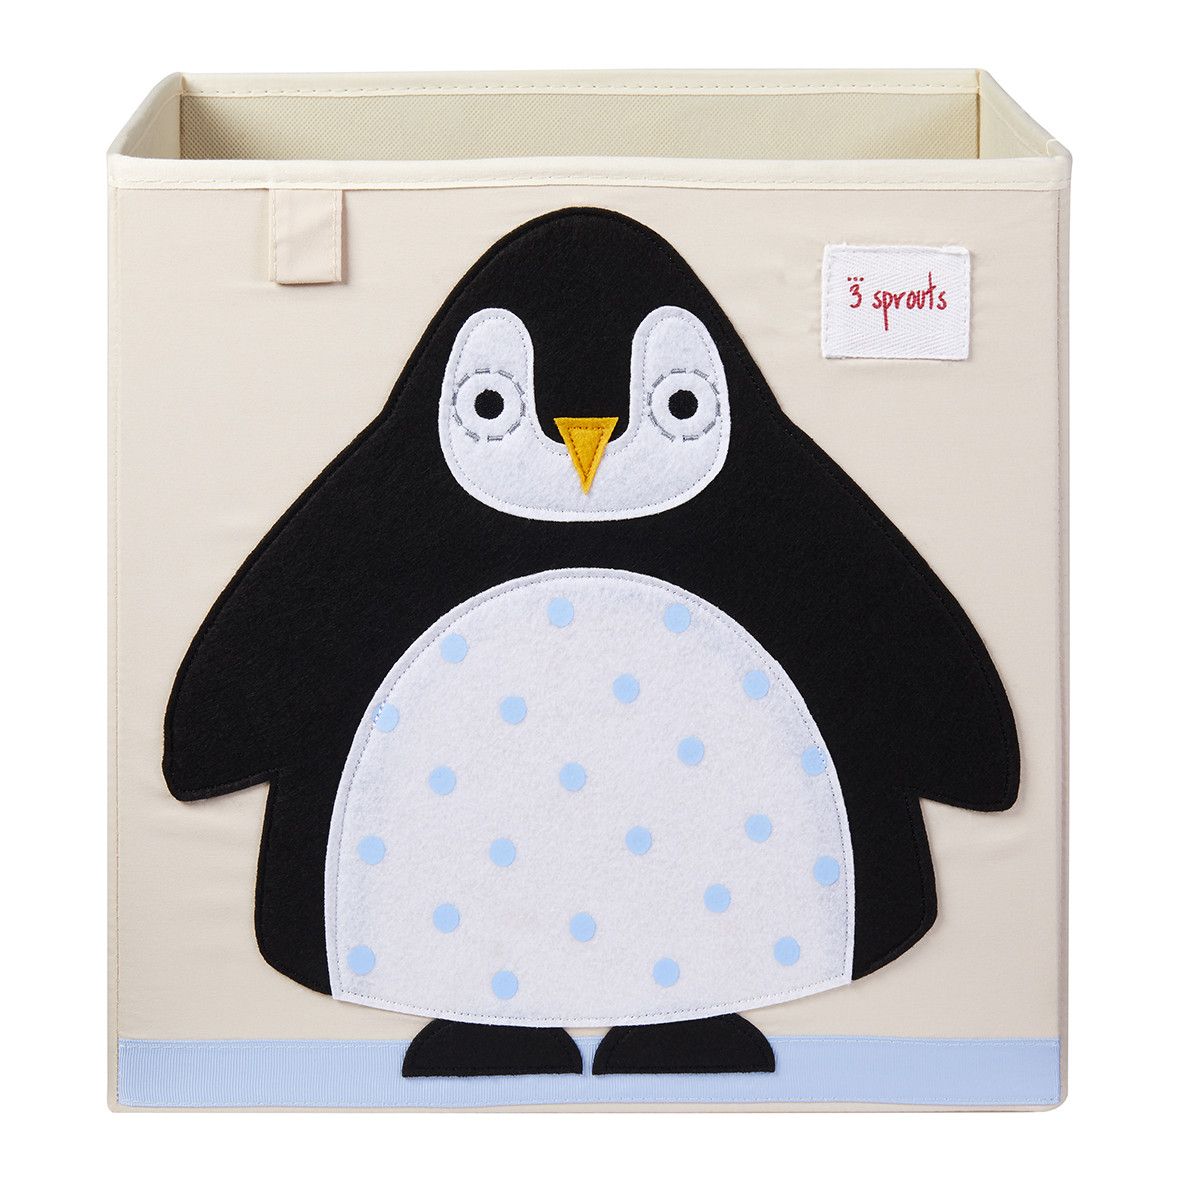 Penguin - 3 Sprouts Storage Cube | The Container Store